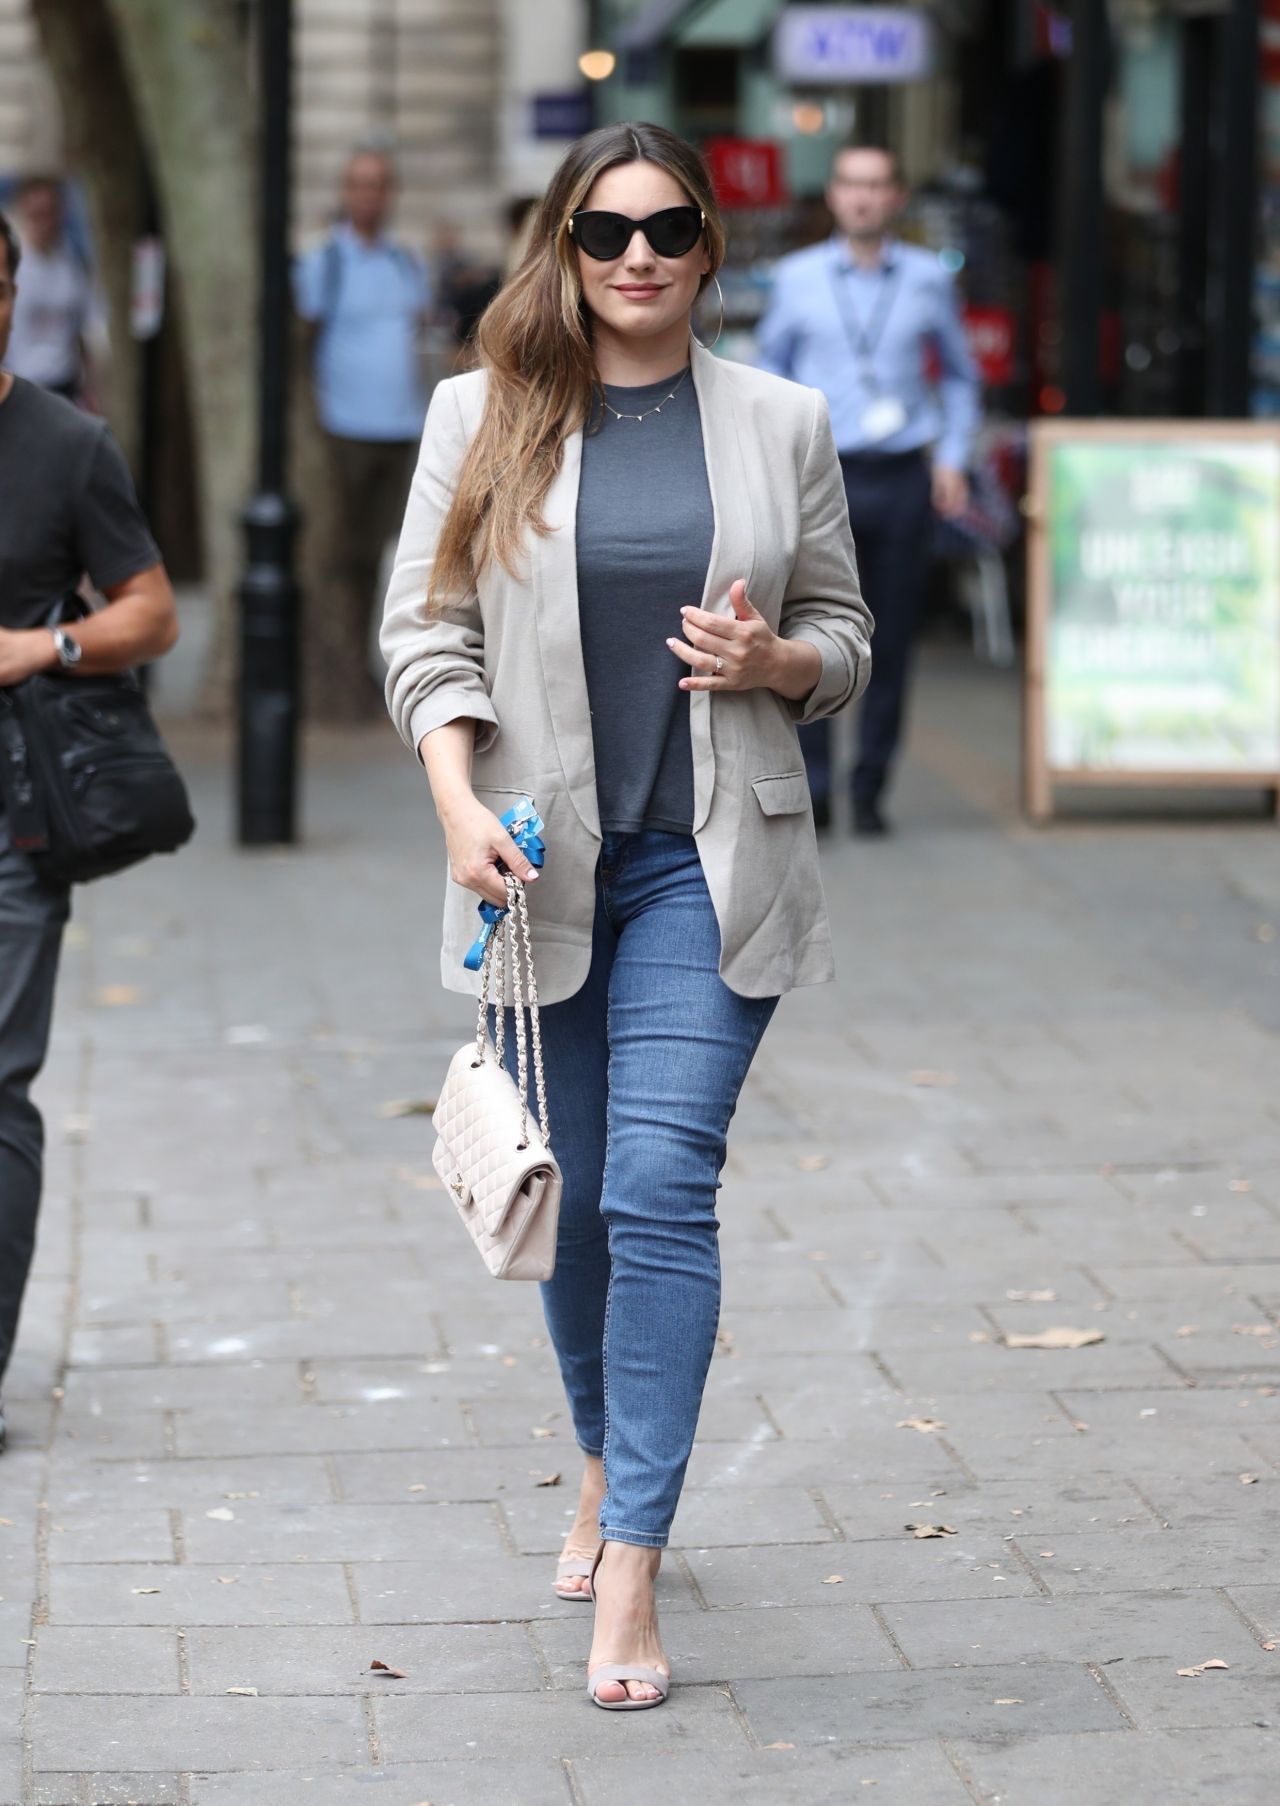 kelly-brook-in-casual-outfit-arriving-at-global-offices-in-london-08-08-2019-3.jpg